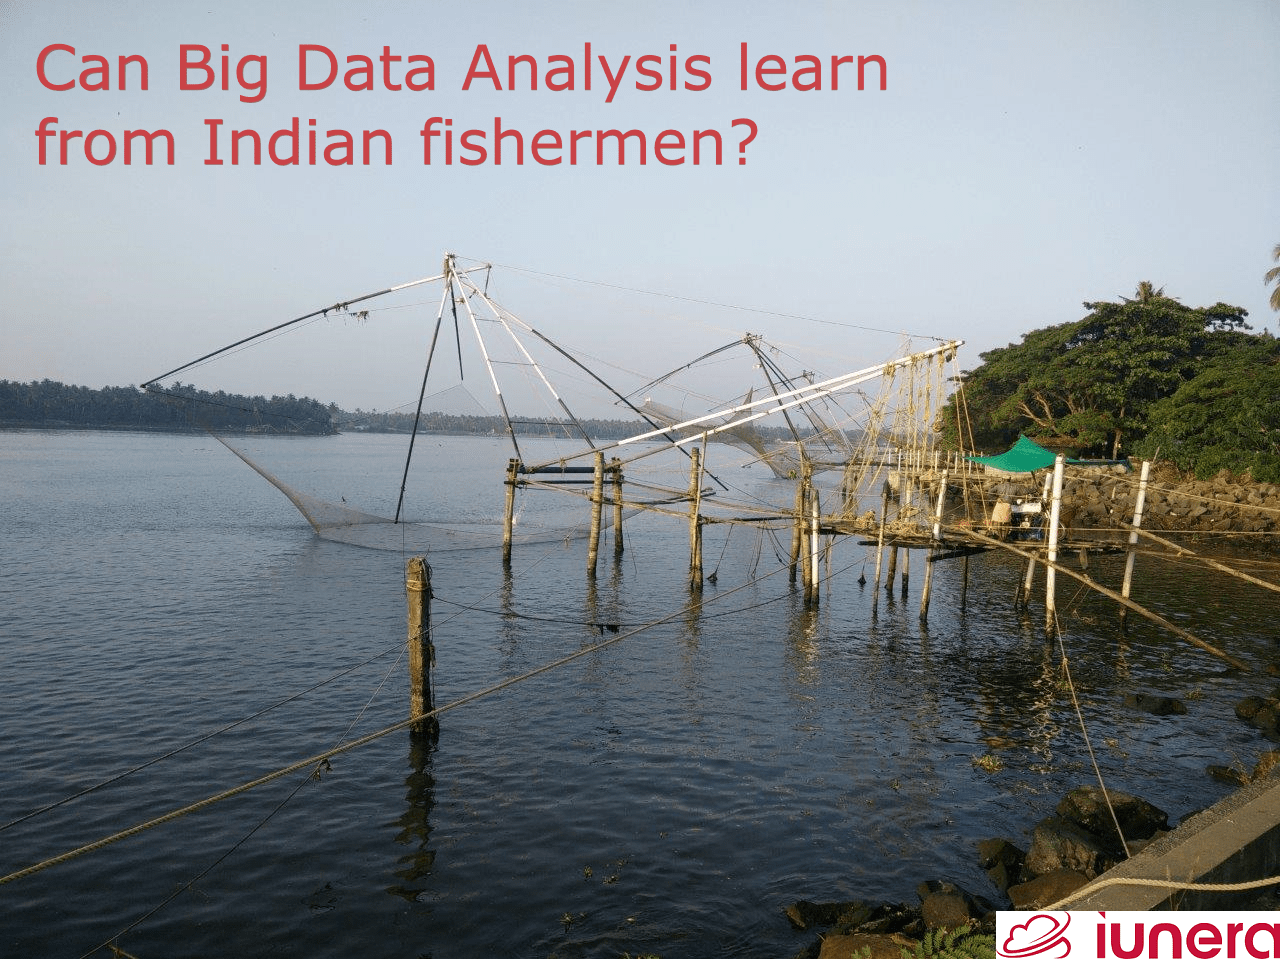 Chinese Fishernets in Kerala. Showing the words: "Can Big Data Analysis learn from Indian fishermen?"